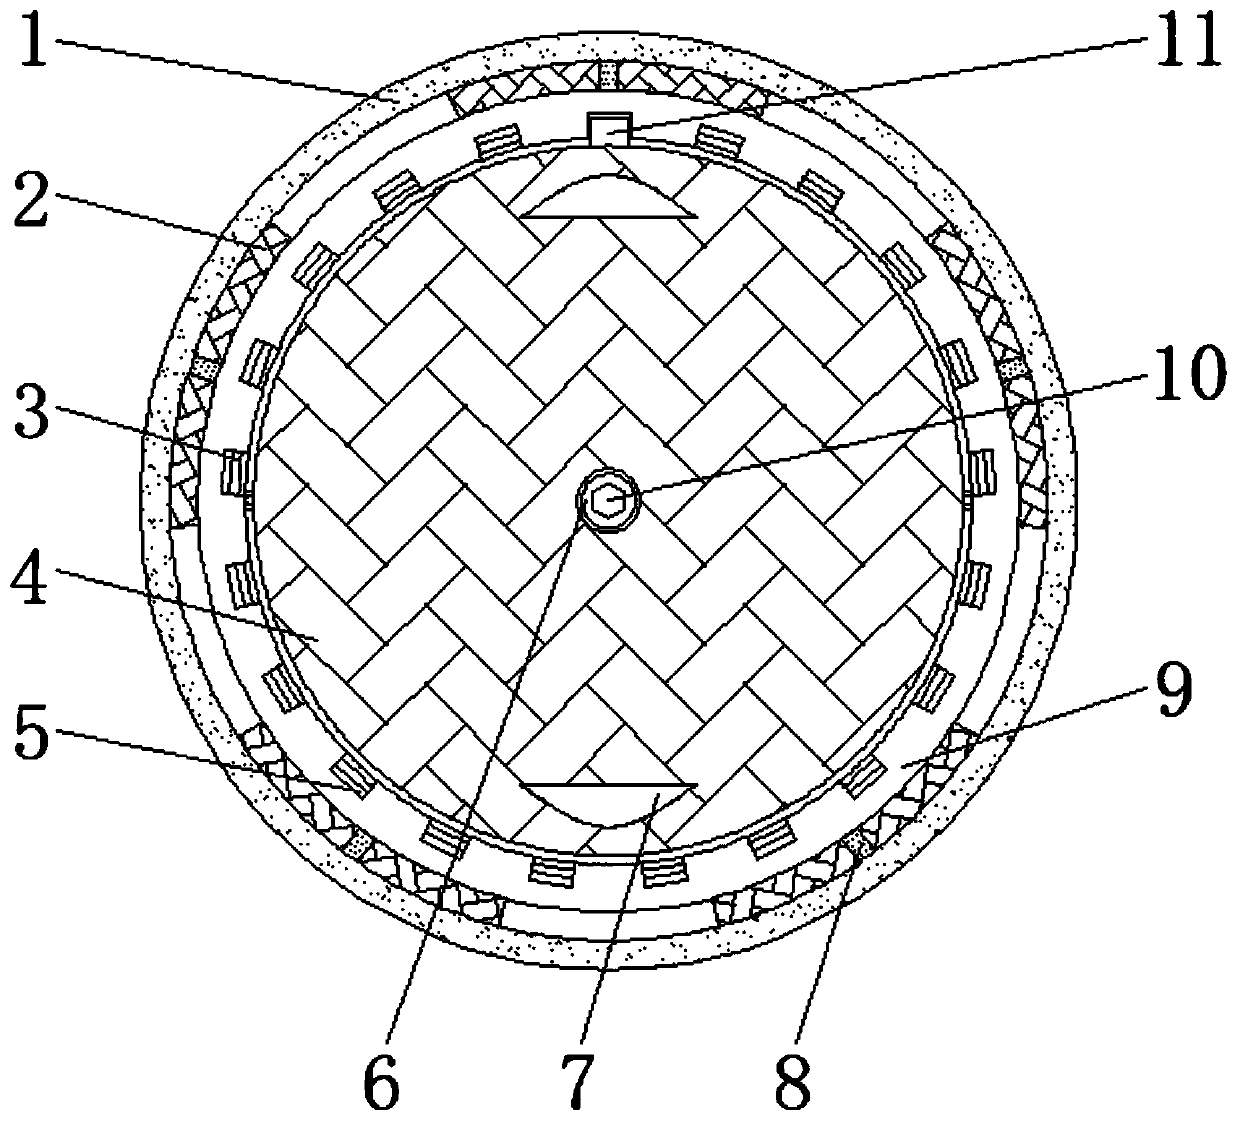 A rotary manhole cover anti-theft mechanism and its operation method